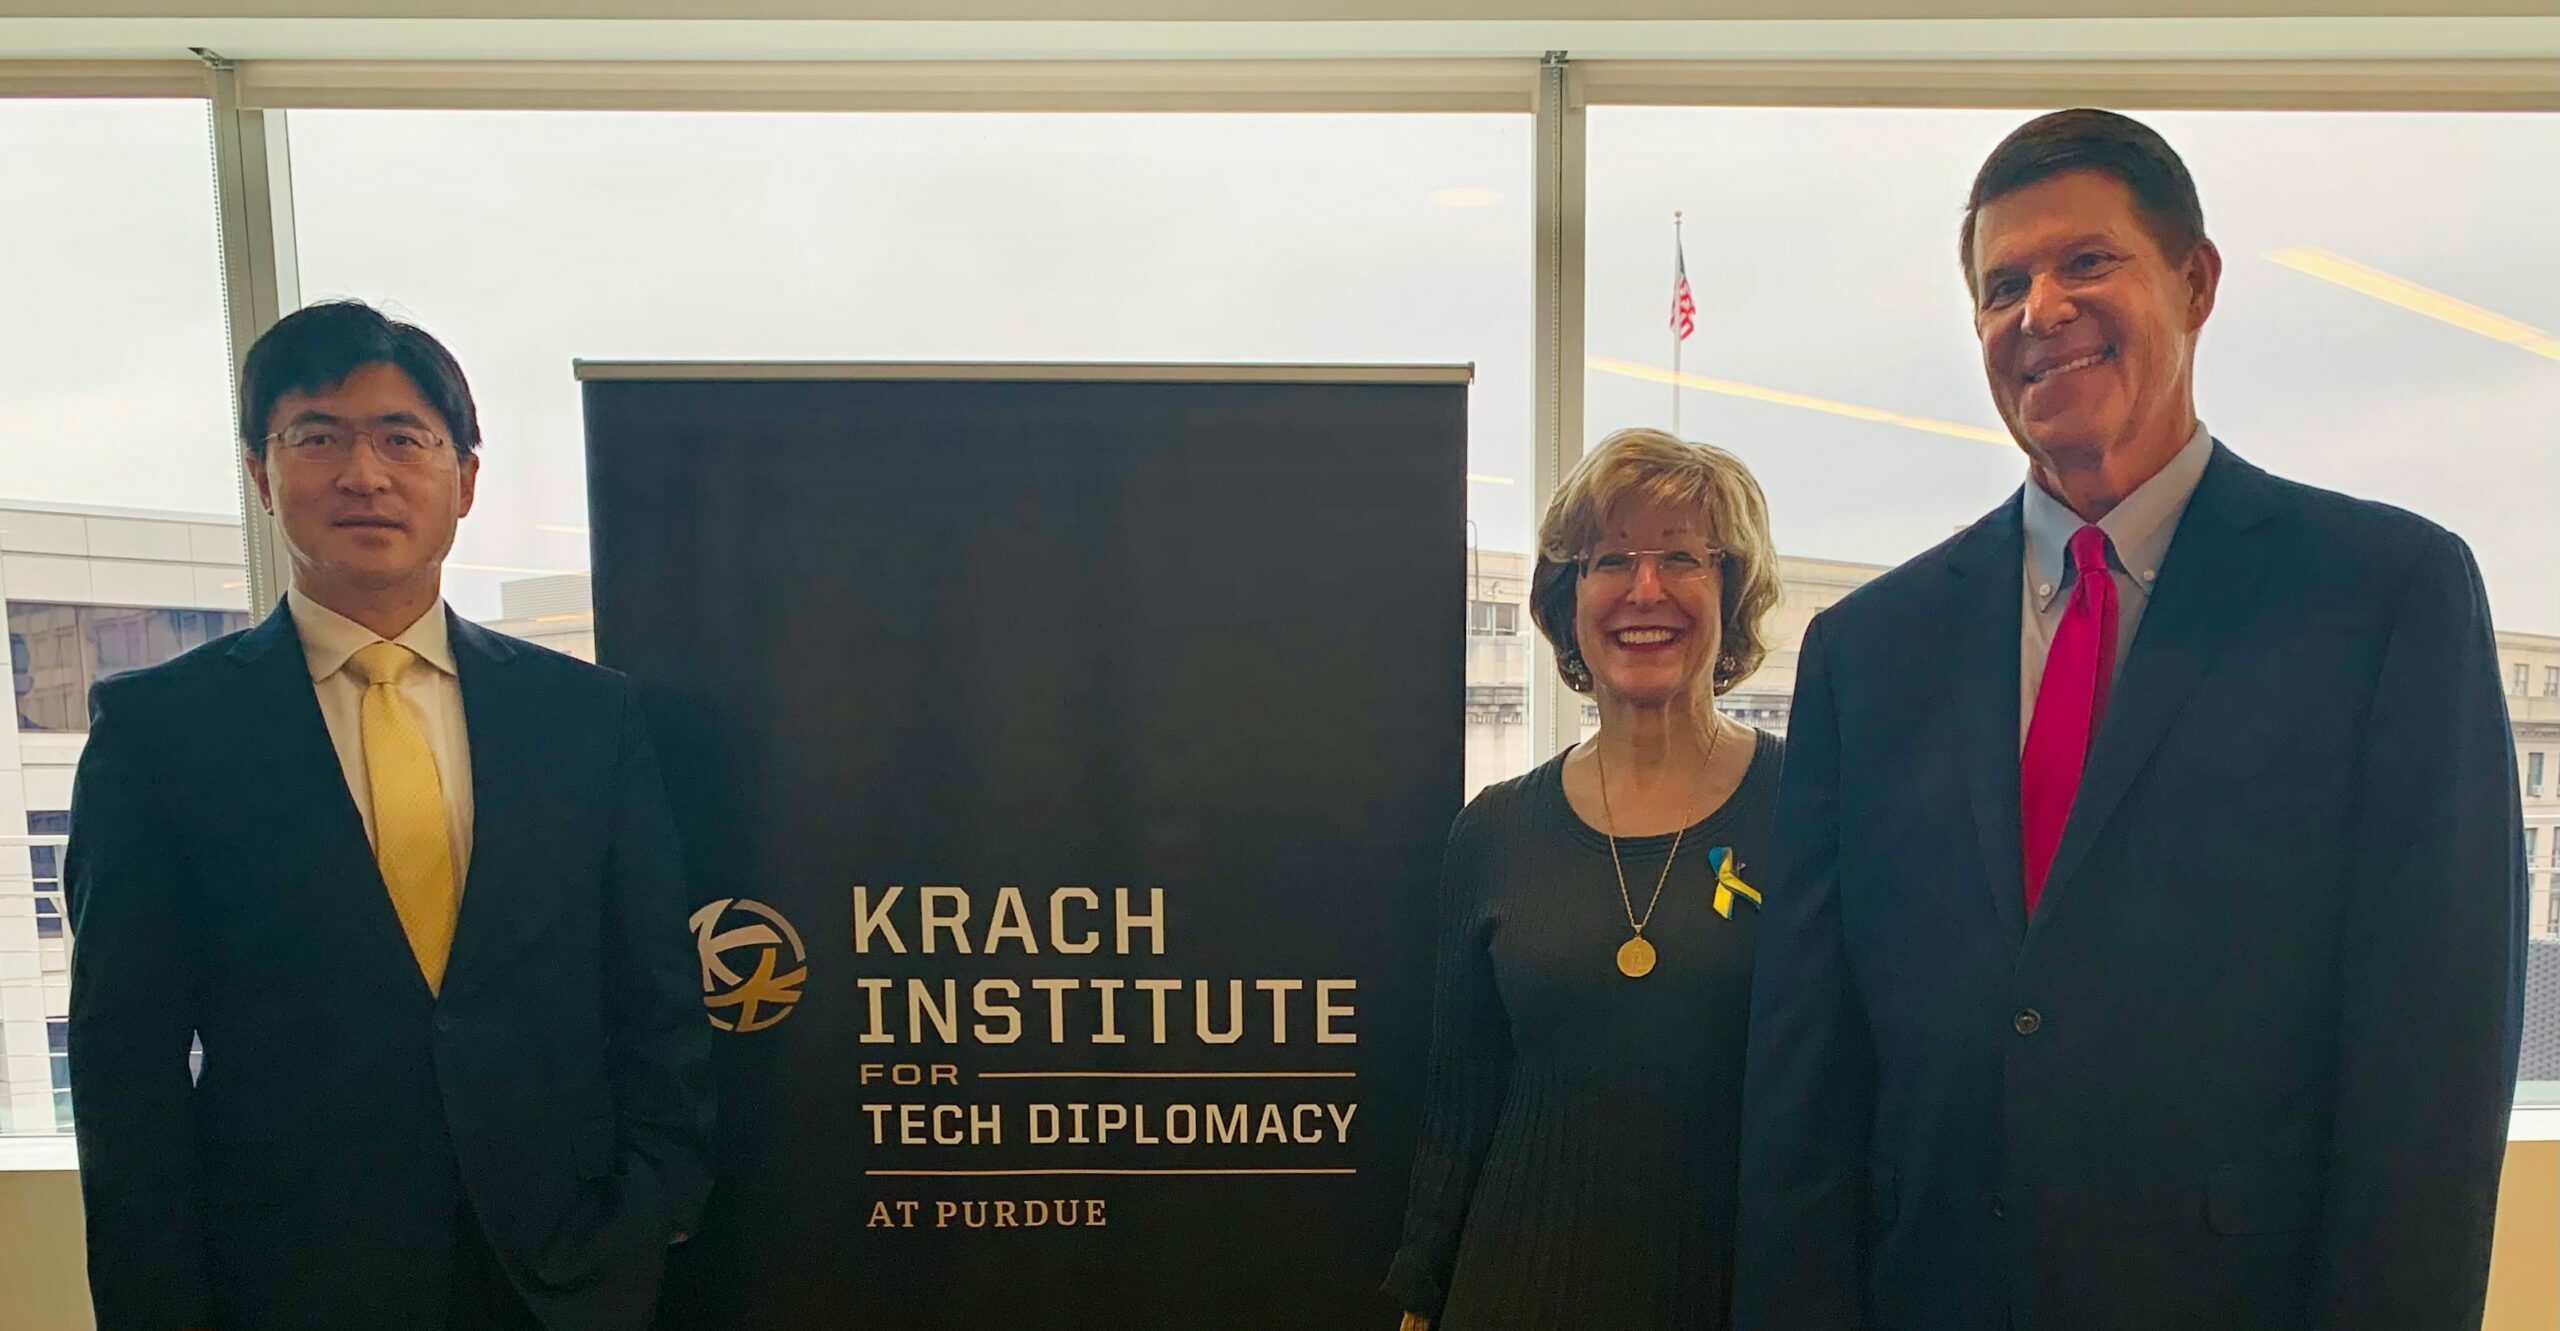 Krach Institute for Tech Diplomacy at Purdue Opens in Honor of 2022 Nobel Peace Prize Nominee Keith Krach